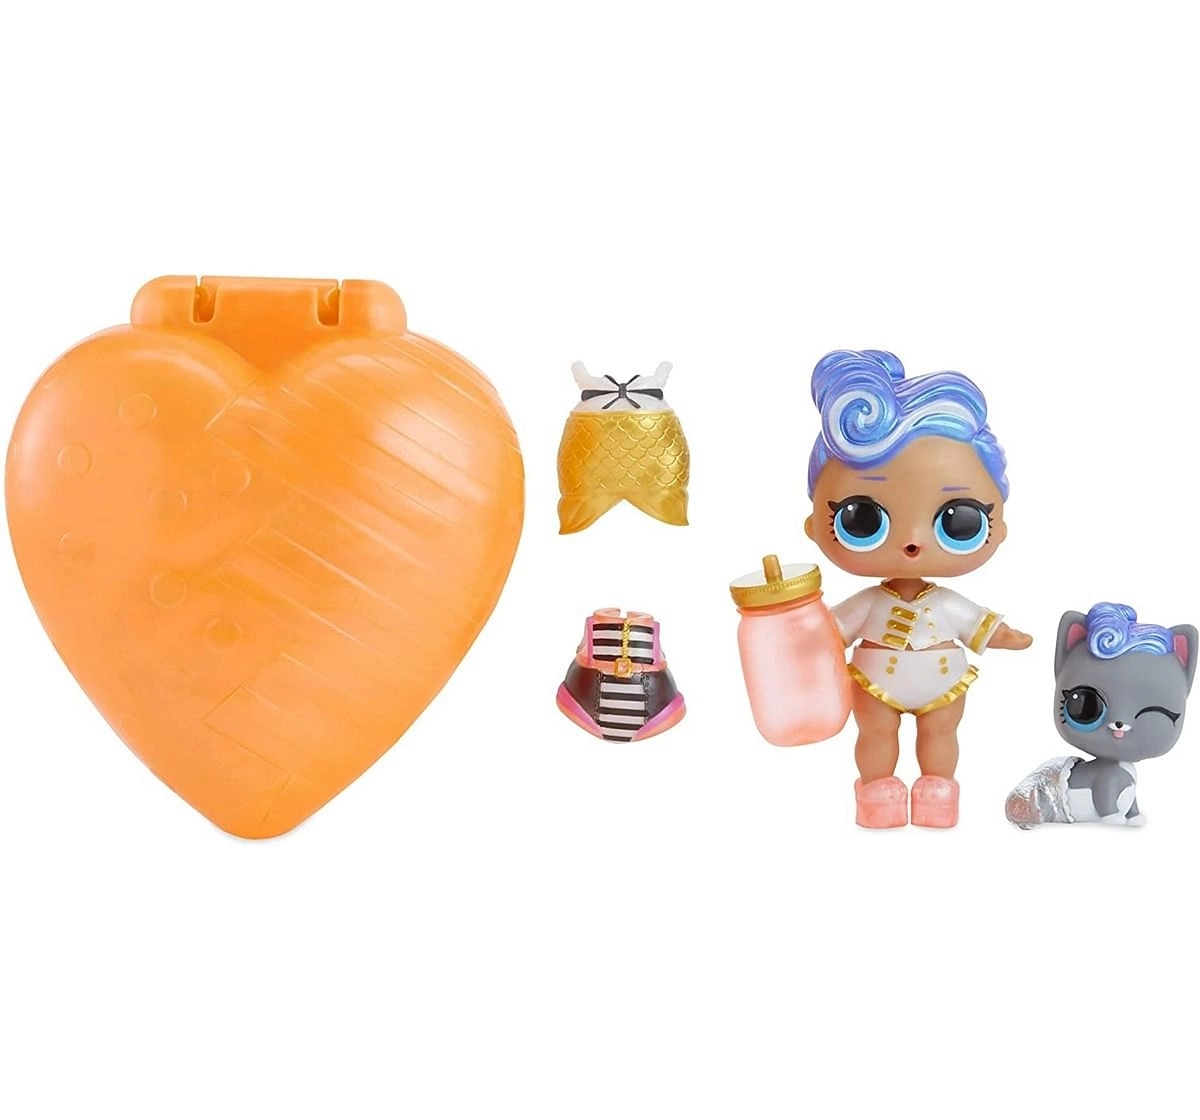 Lol  Surprise Bubbly Surprise Collectible Dolls for Girls age 6Y+ (Assorted)